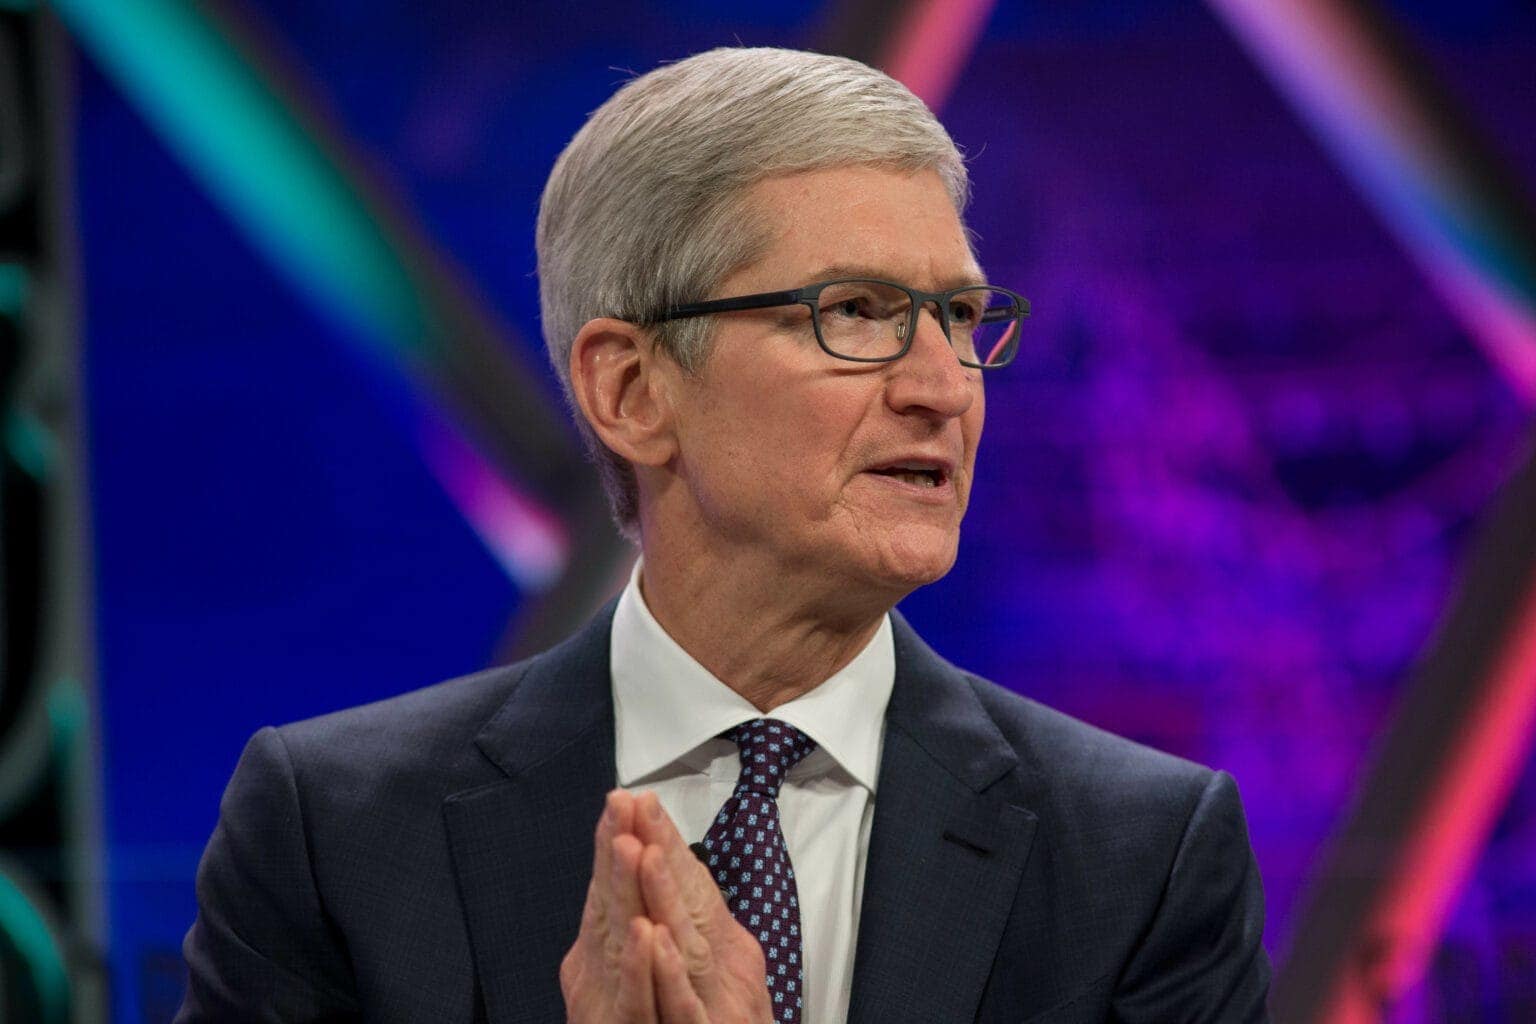 Apple manufacturing in Indonesia could happen, CEO Tim Cook implied